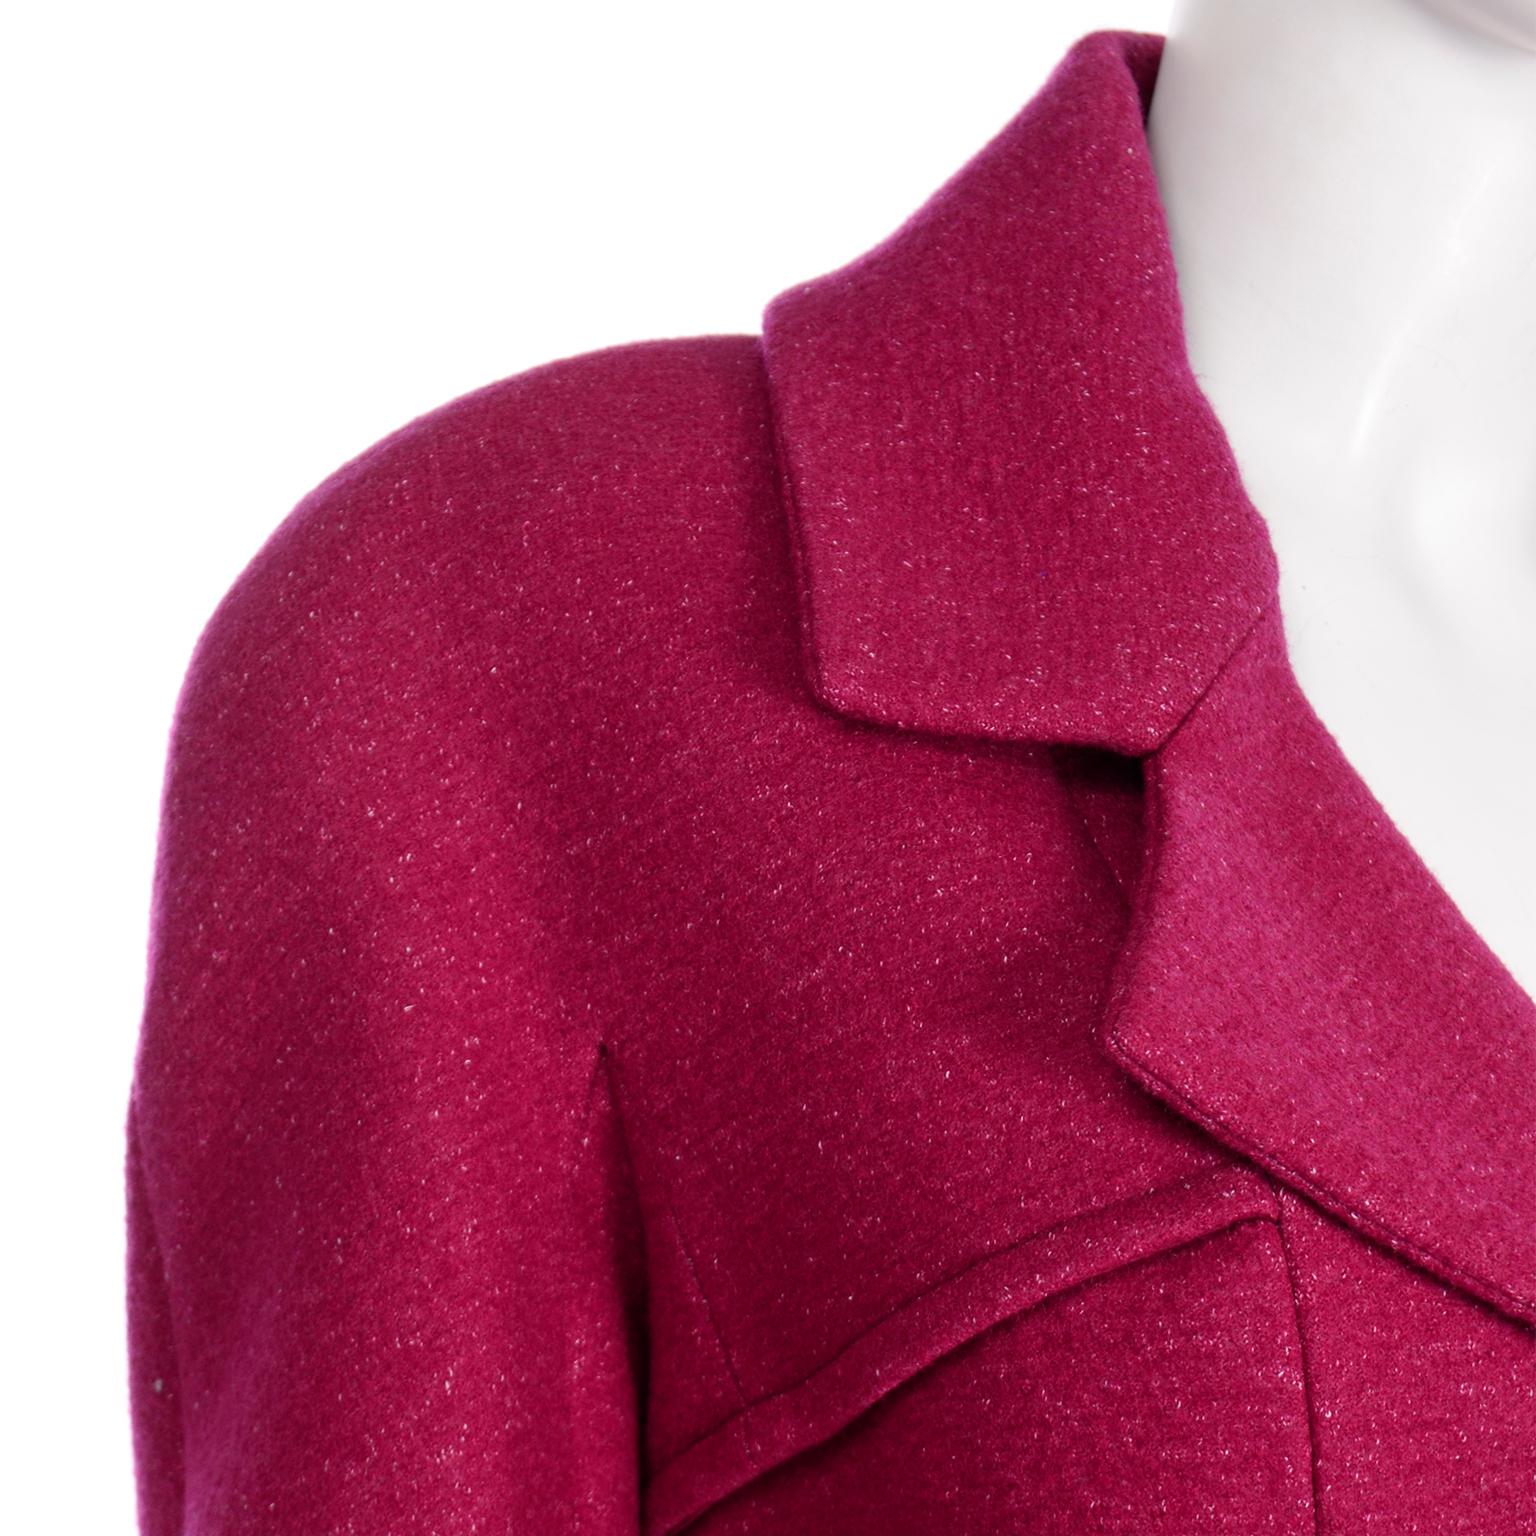 Chanel New With Tags 2018 Raspberry Pink Wool Blend Jacket Deadstock 1